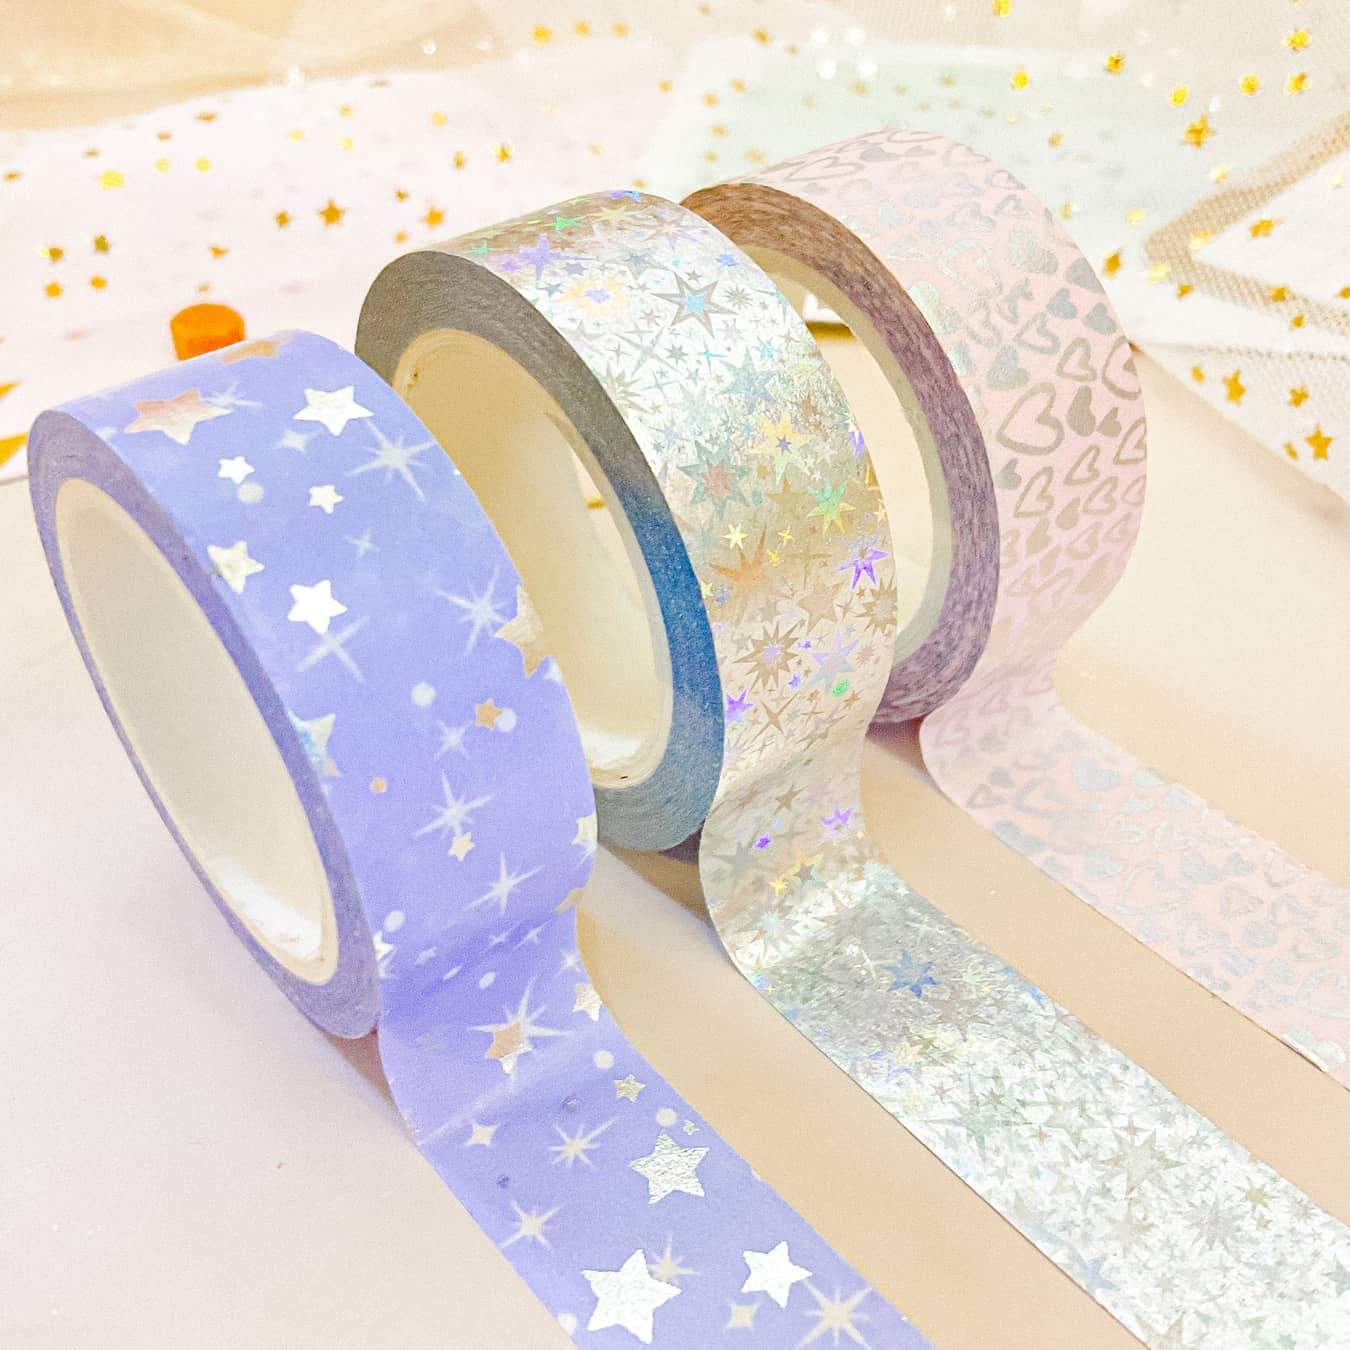 Set of 10 Washi Tape, Silver Foiled Set, Silver Accent Stars, Hearts, 8mm  X2m Each Roll, Thin Washi Tape Set, Junk Journal, Scrapbooking, -   Canada